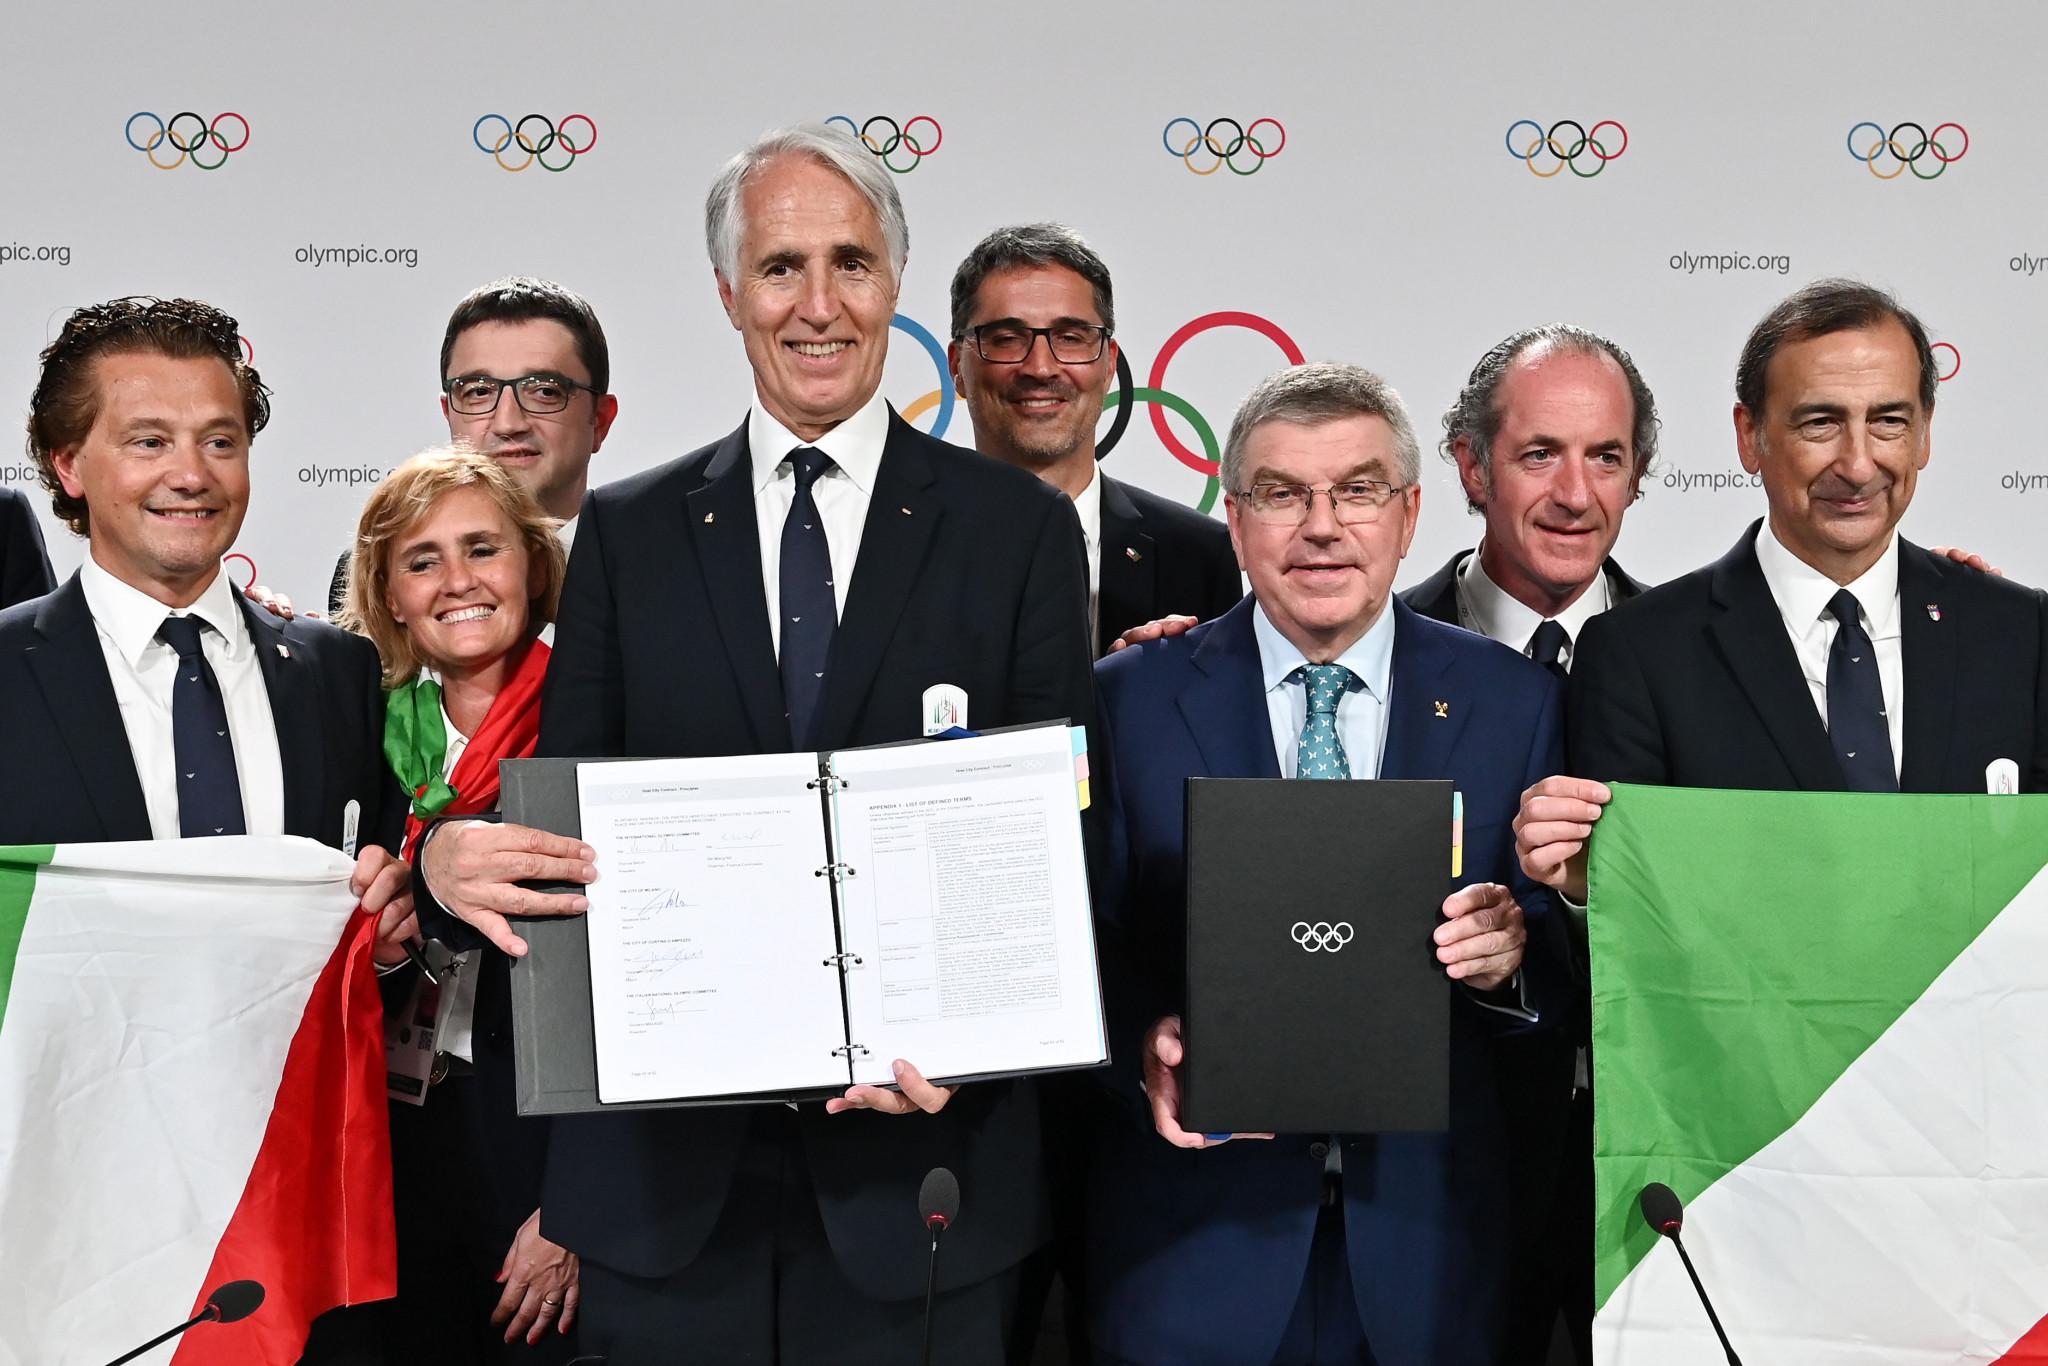 Officials from the IOC and Milan Cortina 2026 signed the Host City Contract ©Getty Images